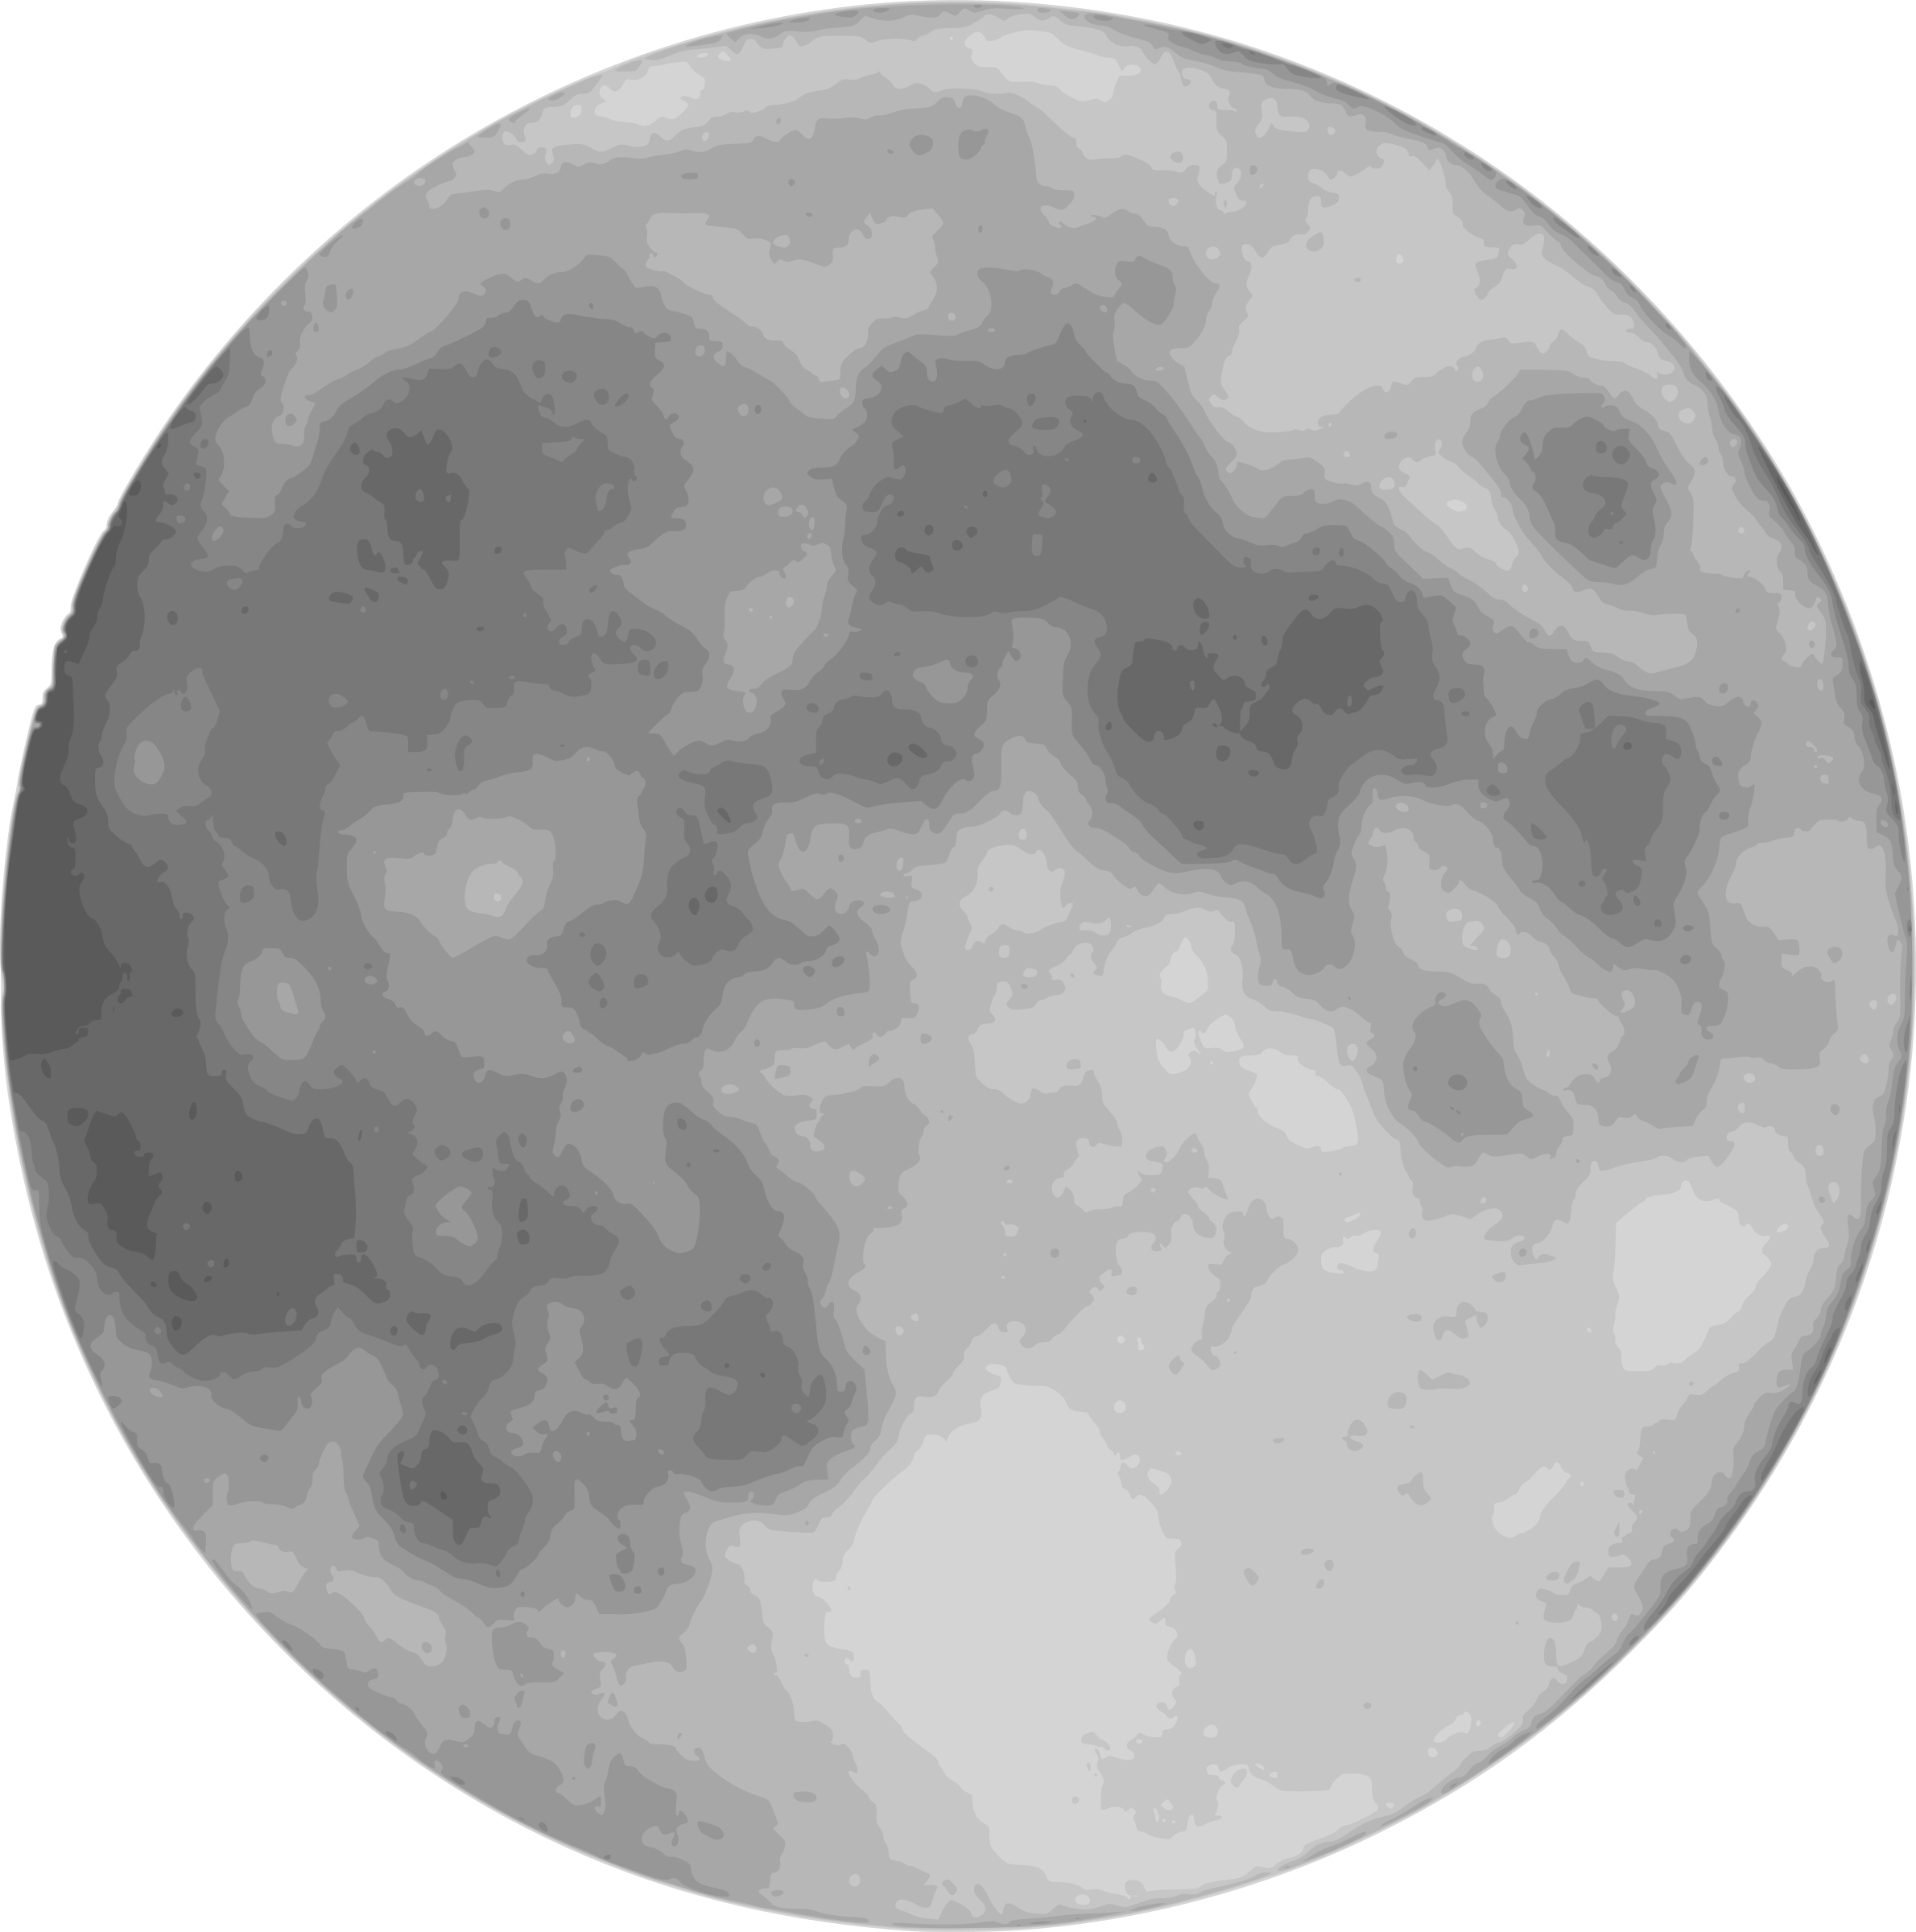 Full moon Halloween Clip art - Moon PNG png download - 2380*2400 - Free ...